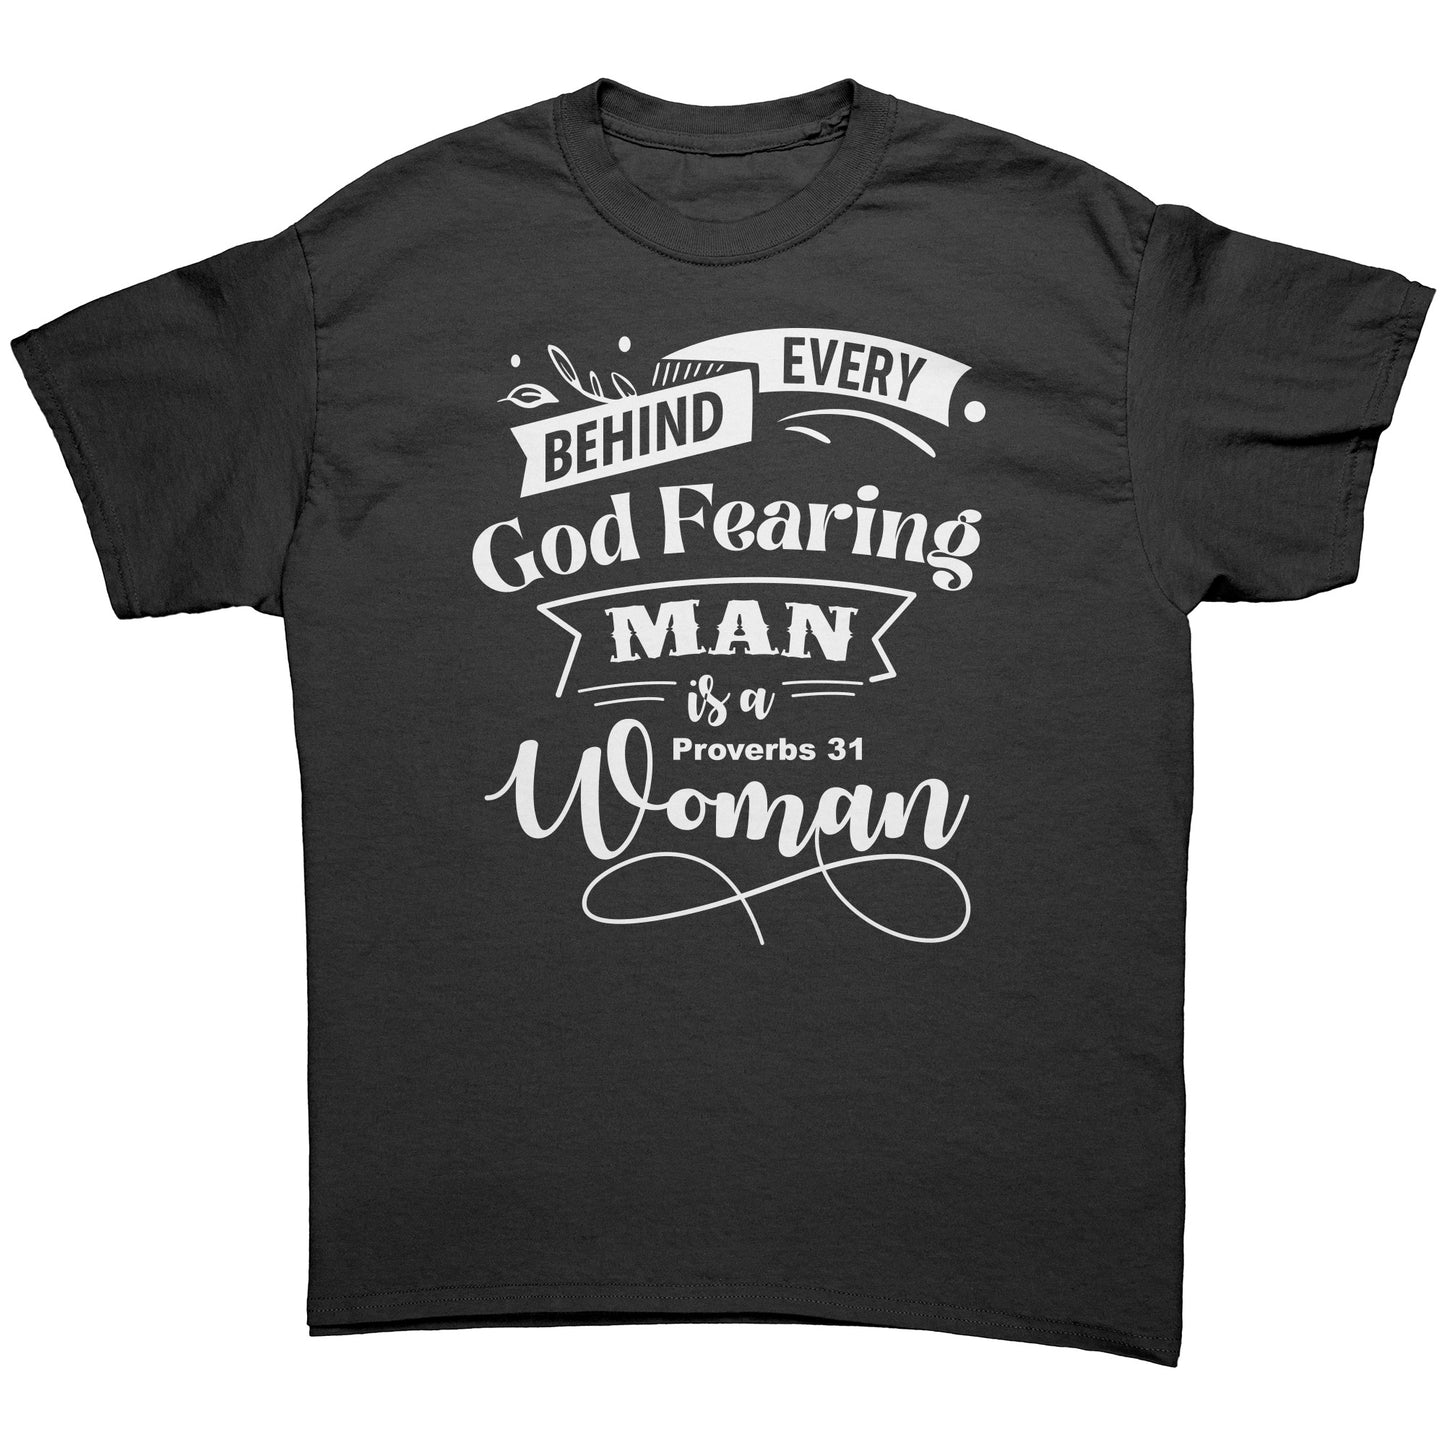 Behind Every God Fearing Man Is A Proverbs 31 Woman Men's T-Shirt Part 2